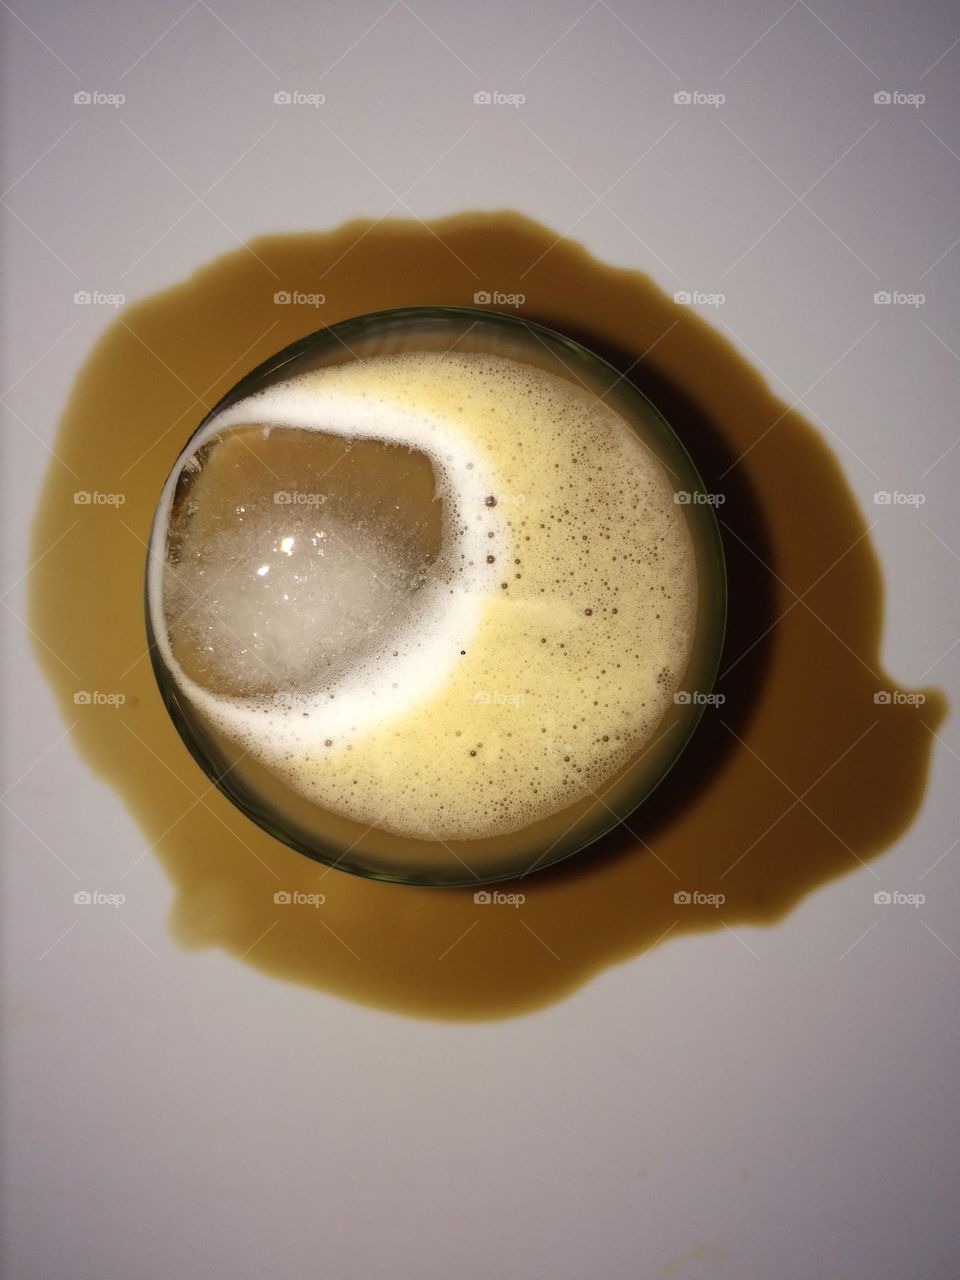 Glass of iced coffee sitting in spilt coffee puddle